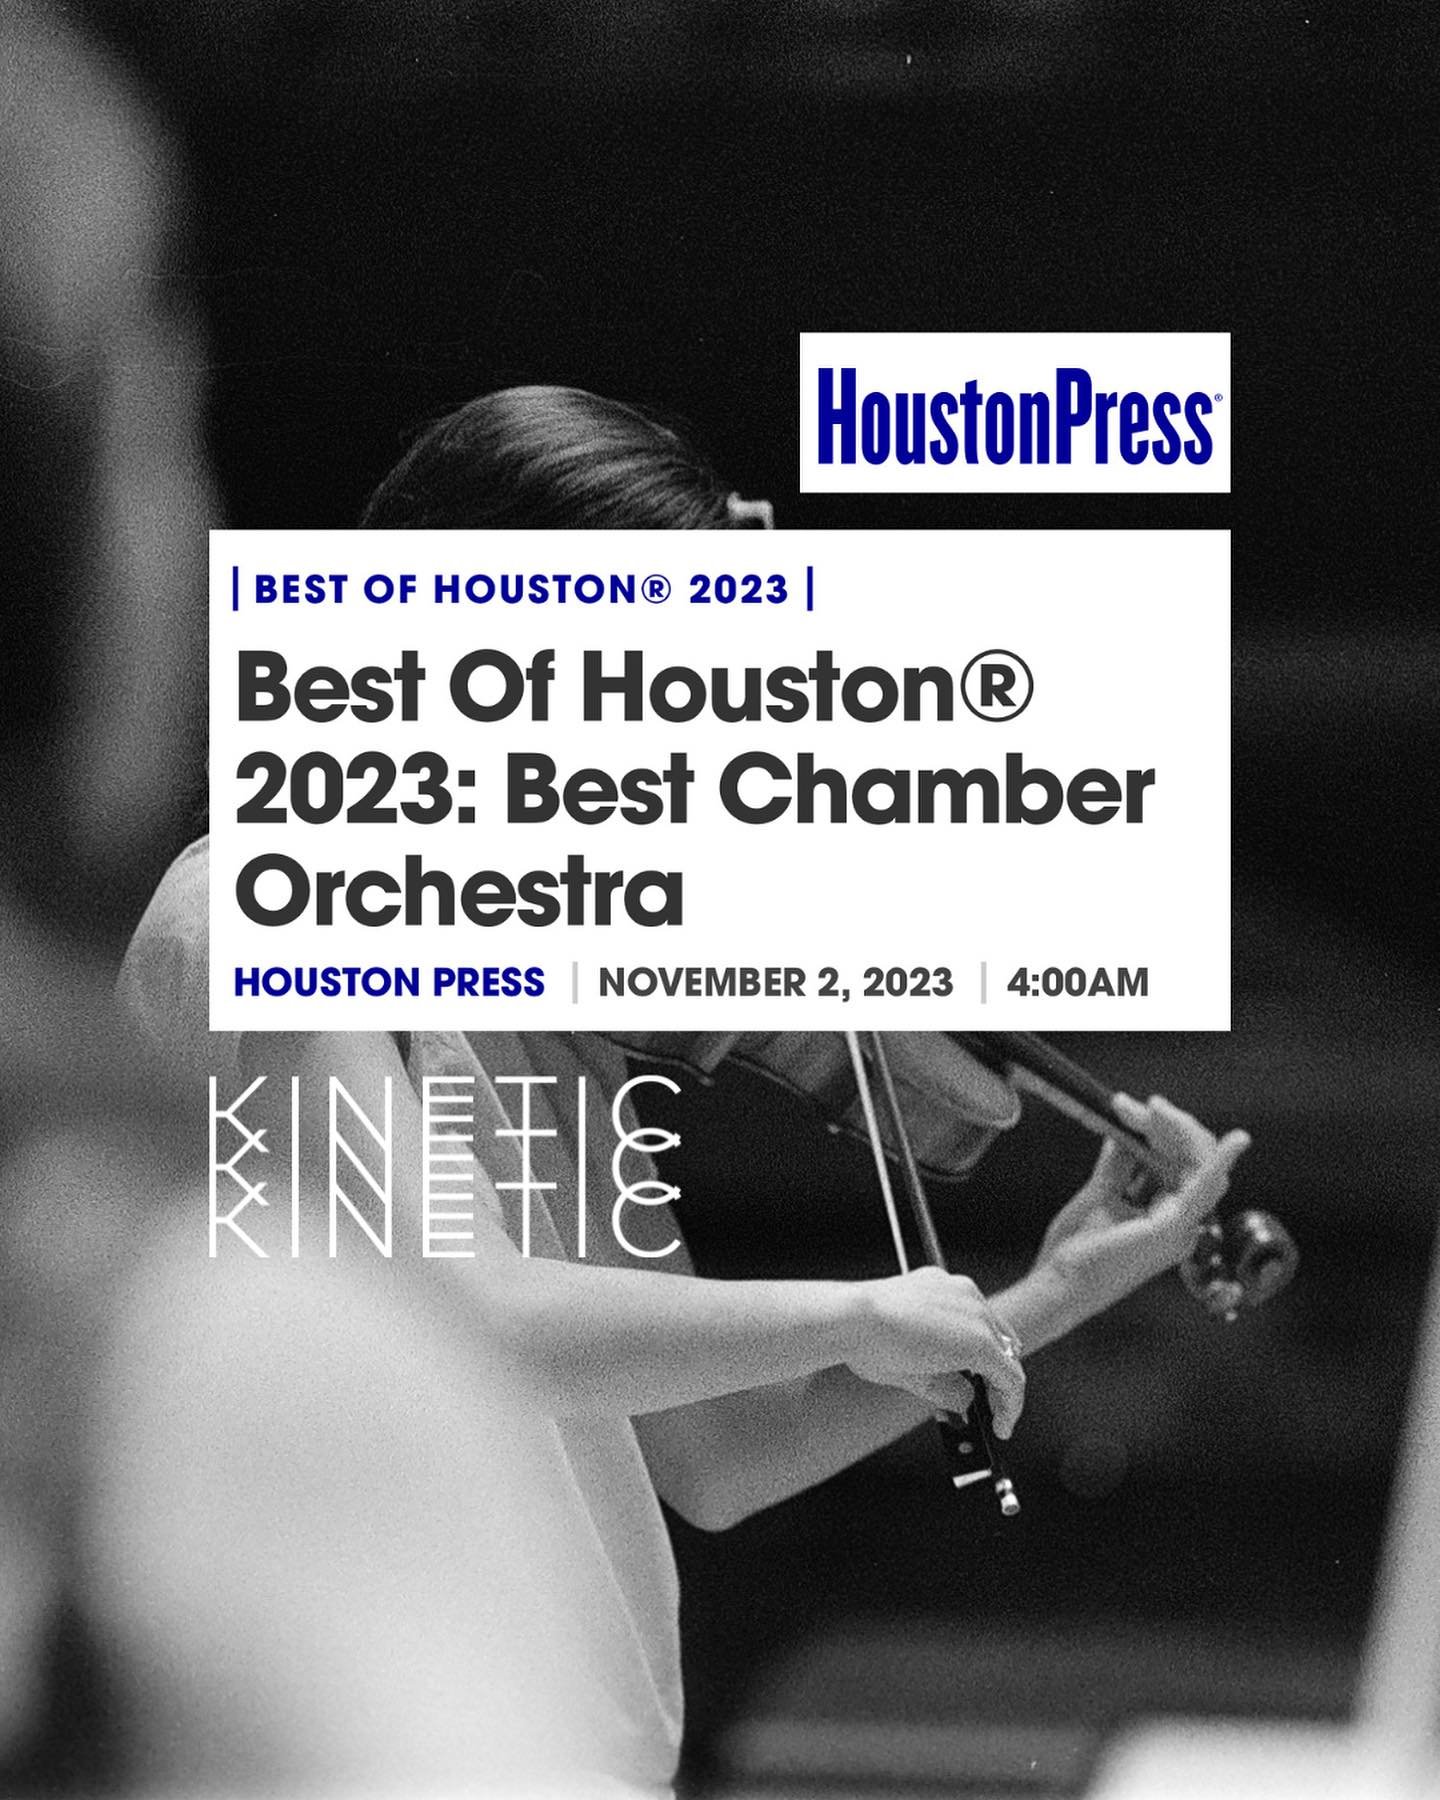 We are thrilled that the @houstonpress has named us the Best Chamber Orchestra of 2023! In case you missed it, our debut album comes out TOMORROW: join us at @edenplant.co to find out what all the excitement is about!